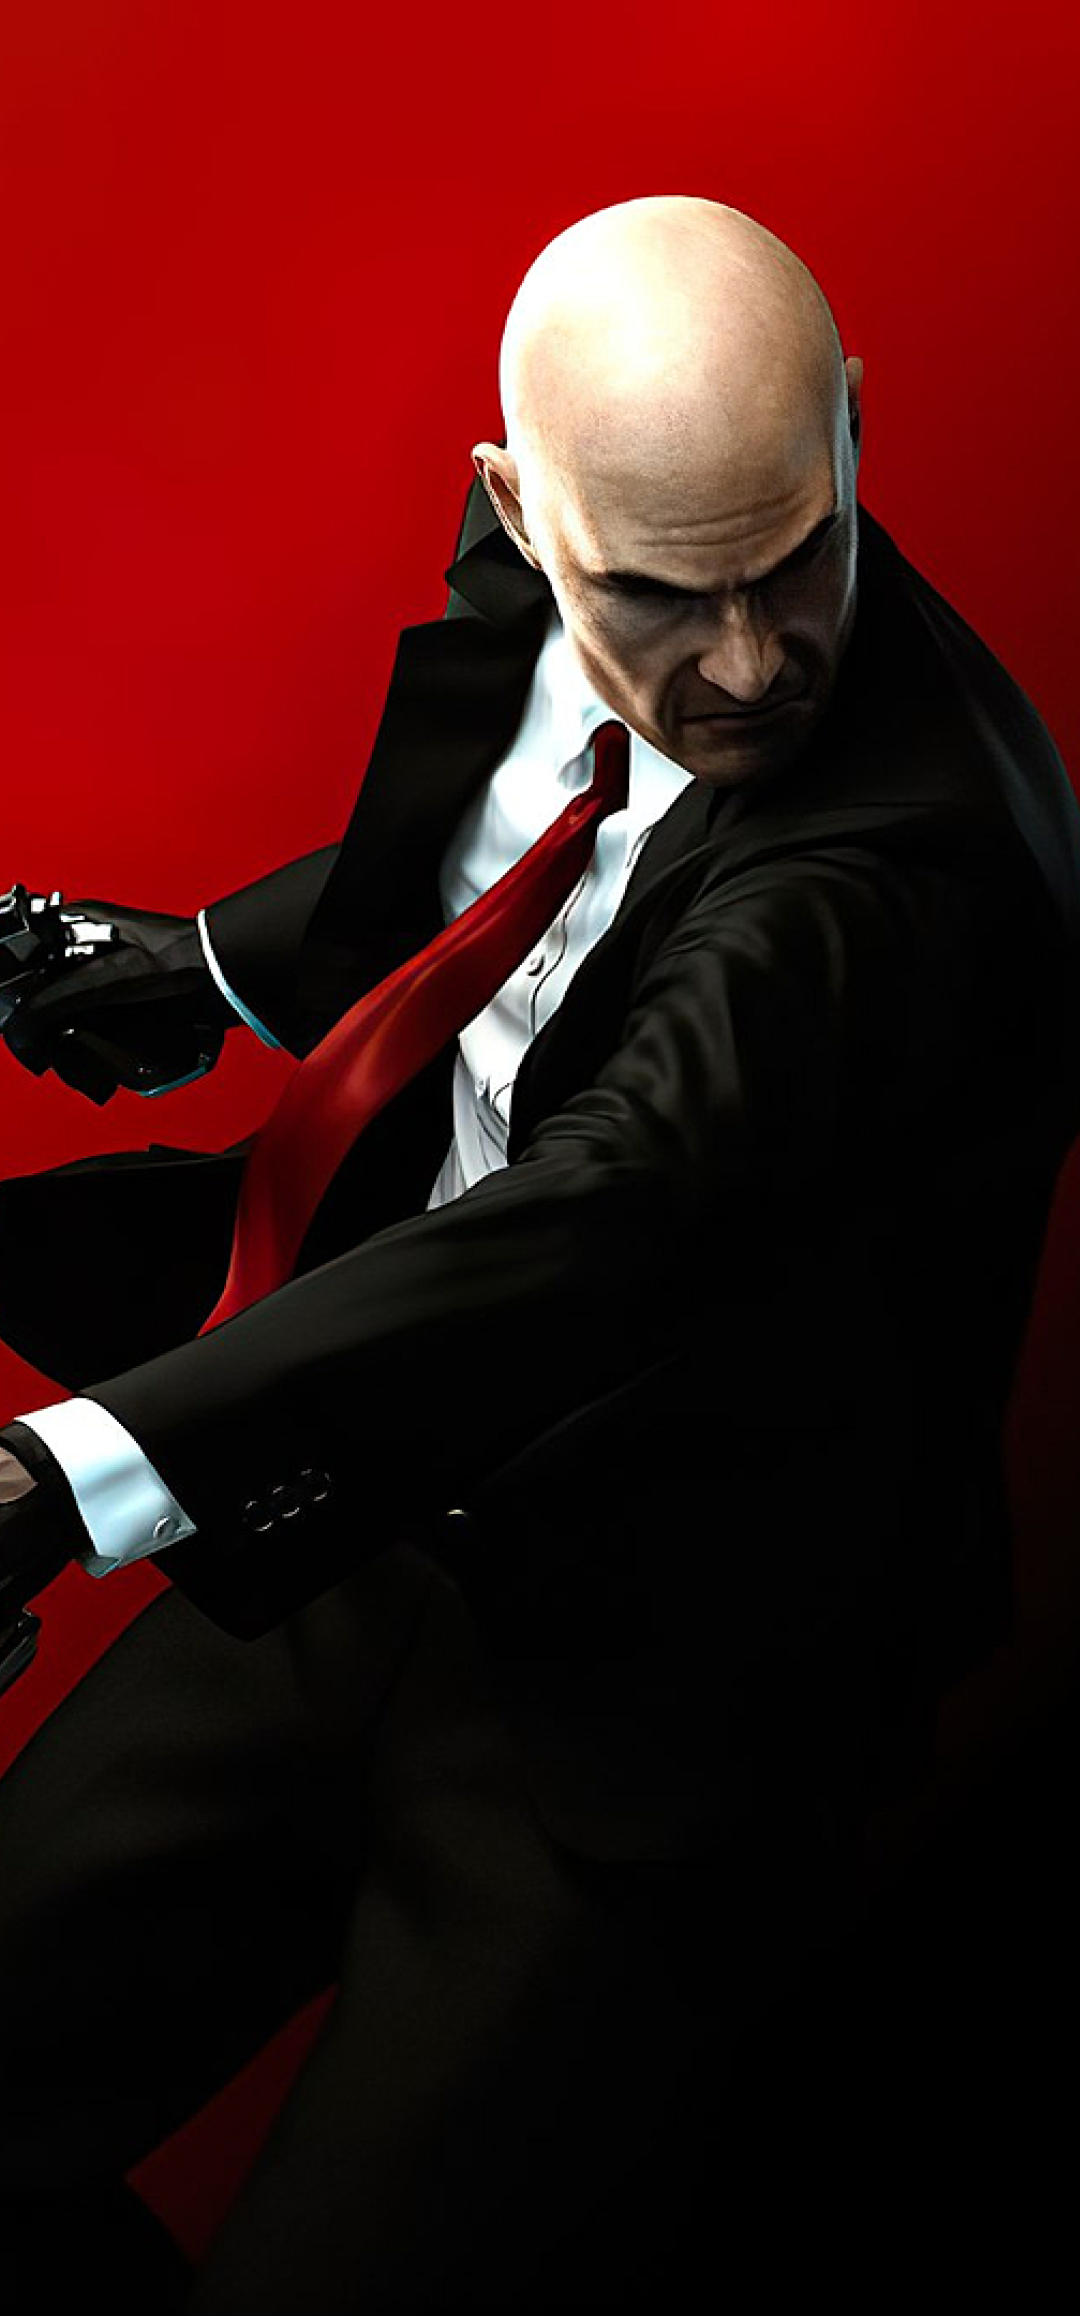 1080x2316 Hitman Absolution Agent 47 1080x2316 Resolution Wallpaper Hd Games 4k Wallpapers Images Photos And Background